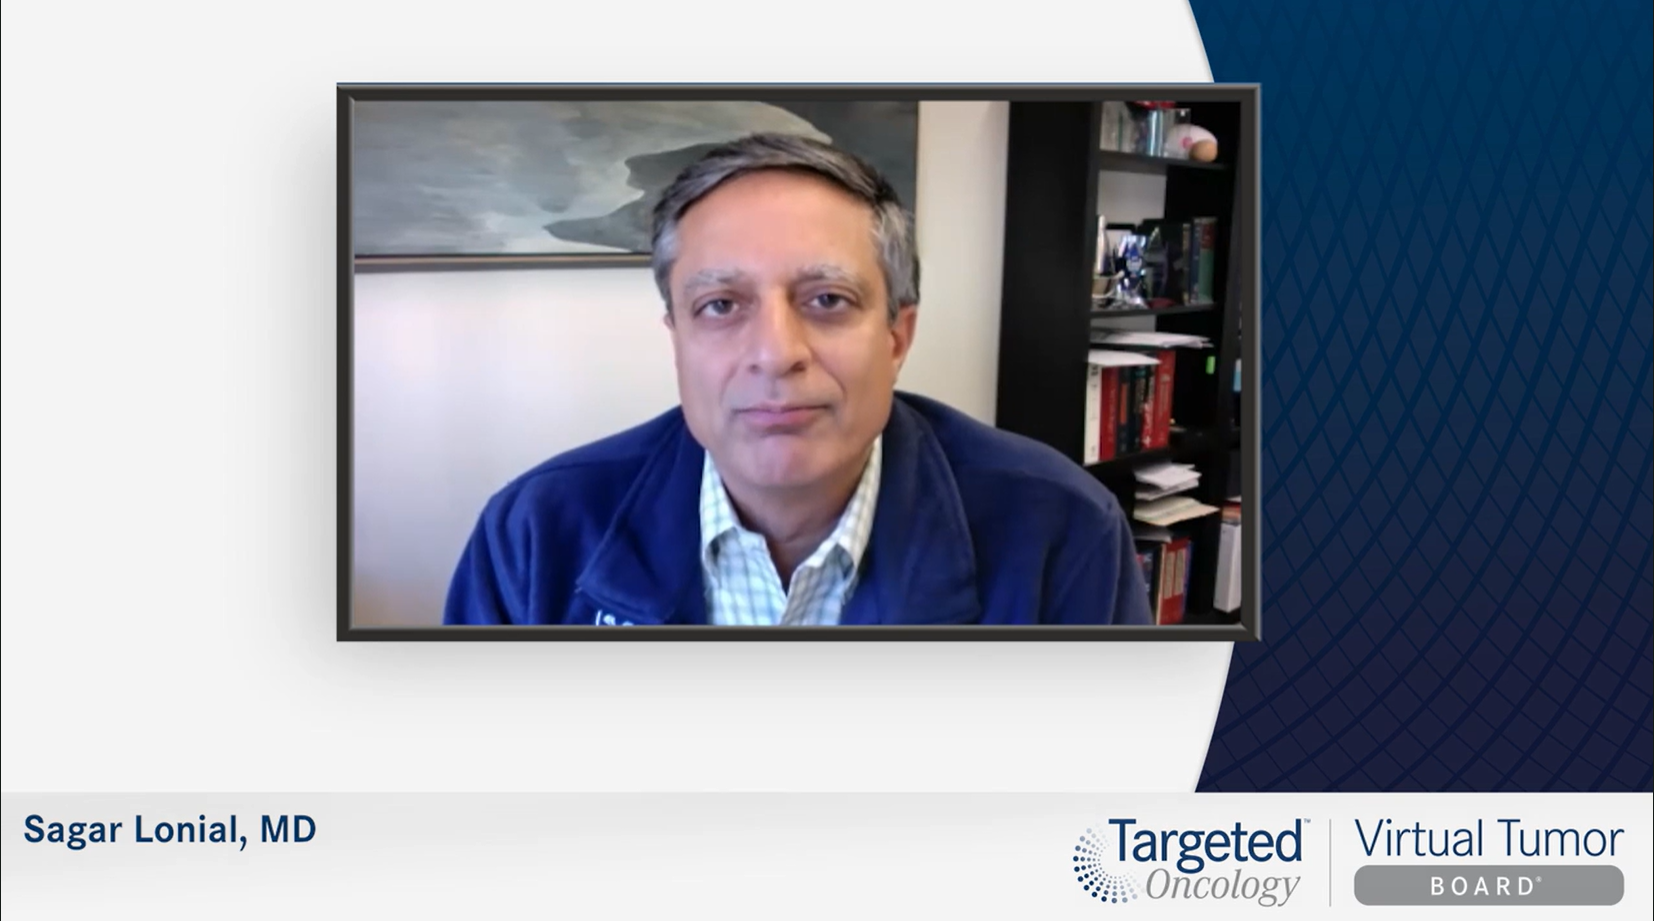 COMING SOON: The Role of BCMA-Directed Therapy in Relapsed/Refractory Multiple Myeloma